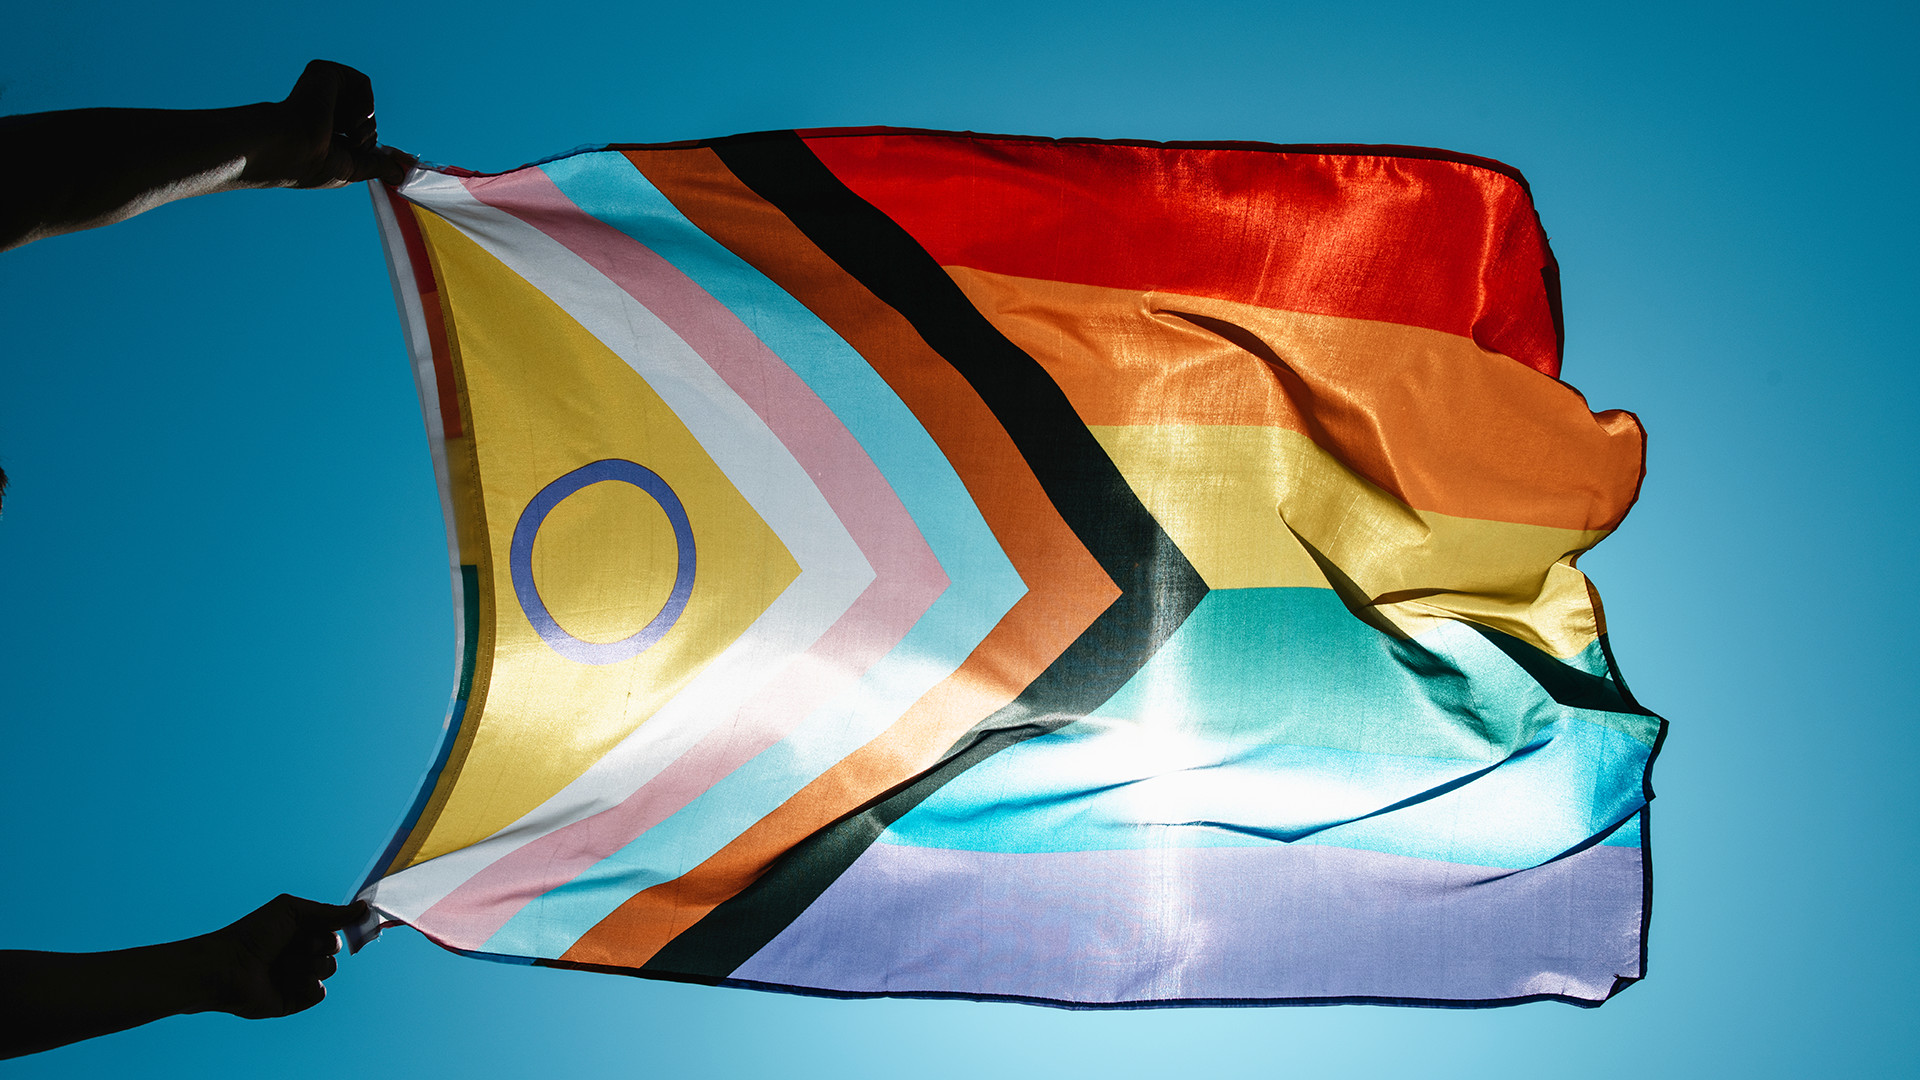 An LGBTQIA+ Progressive Pride rainbow flag is held up by two hands against a blue sky with light shining through the flag.